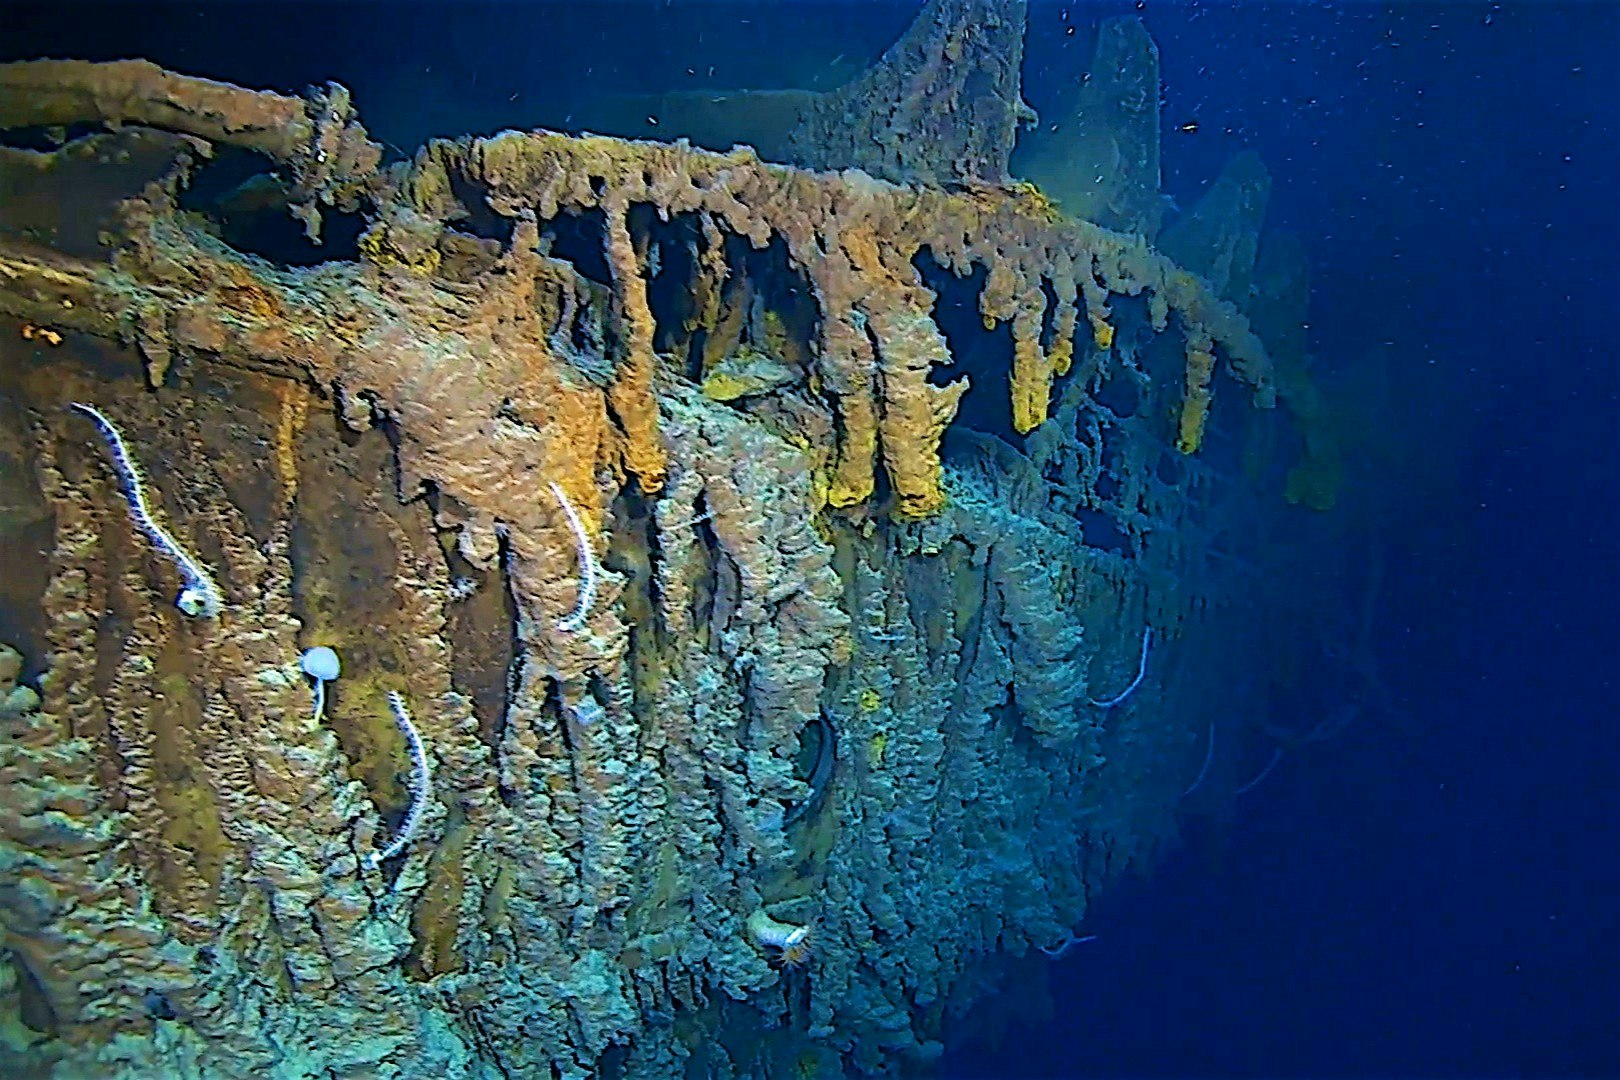 The wreck of the Titanic underwater.